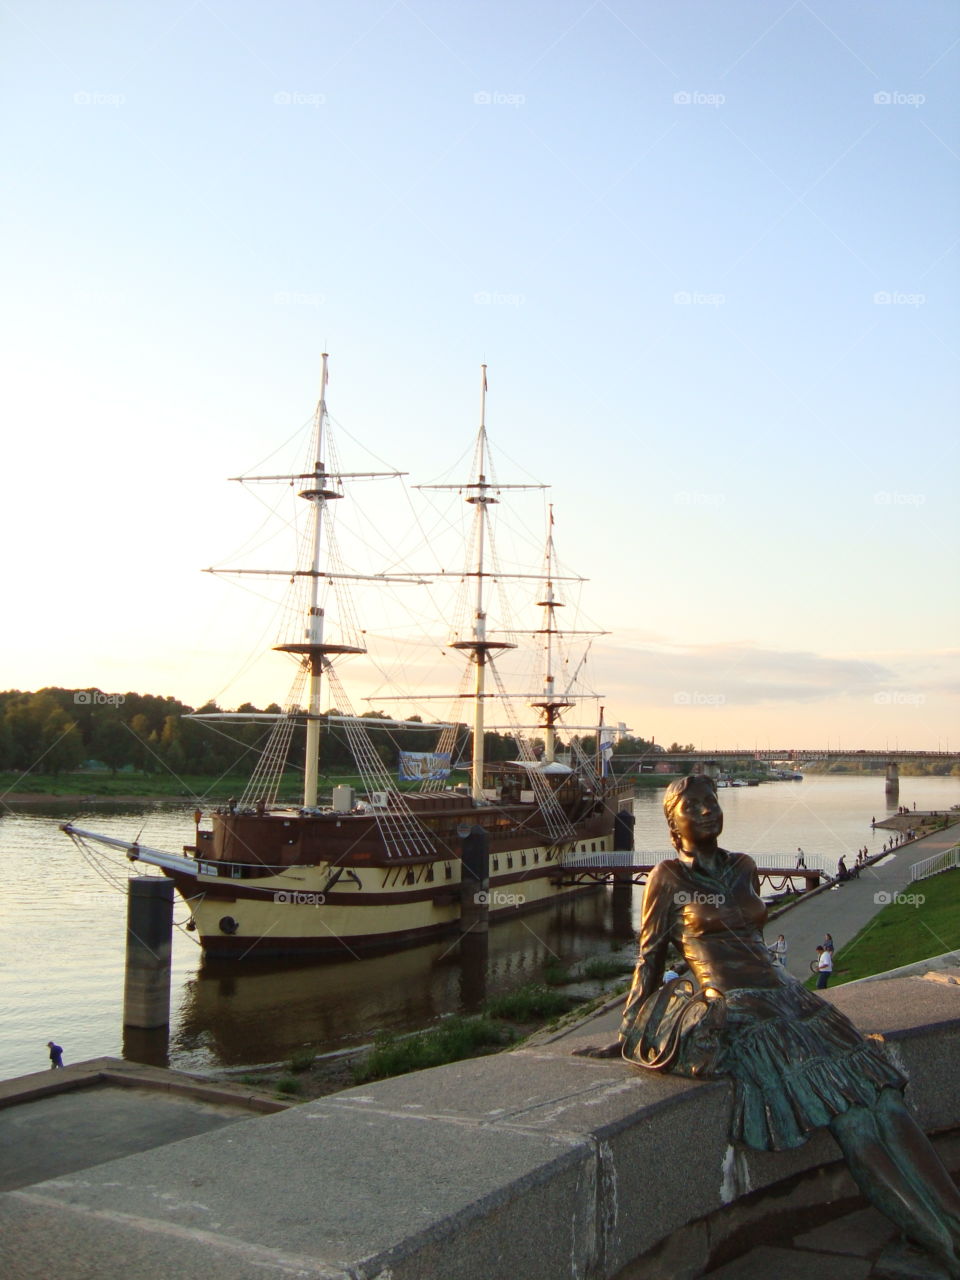 Sculpture of a woman on the promenade of the ship